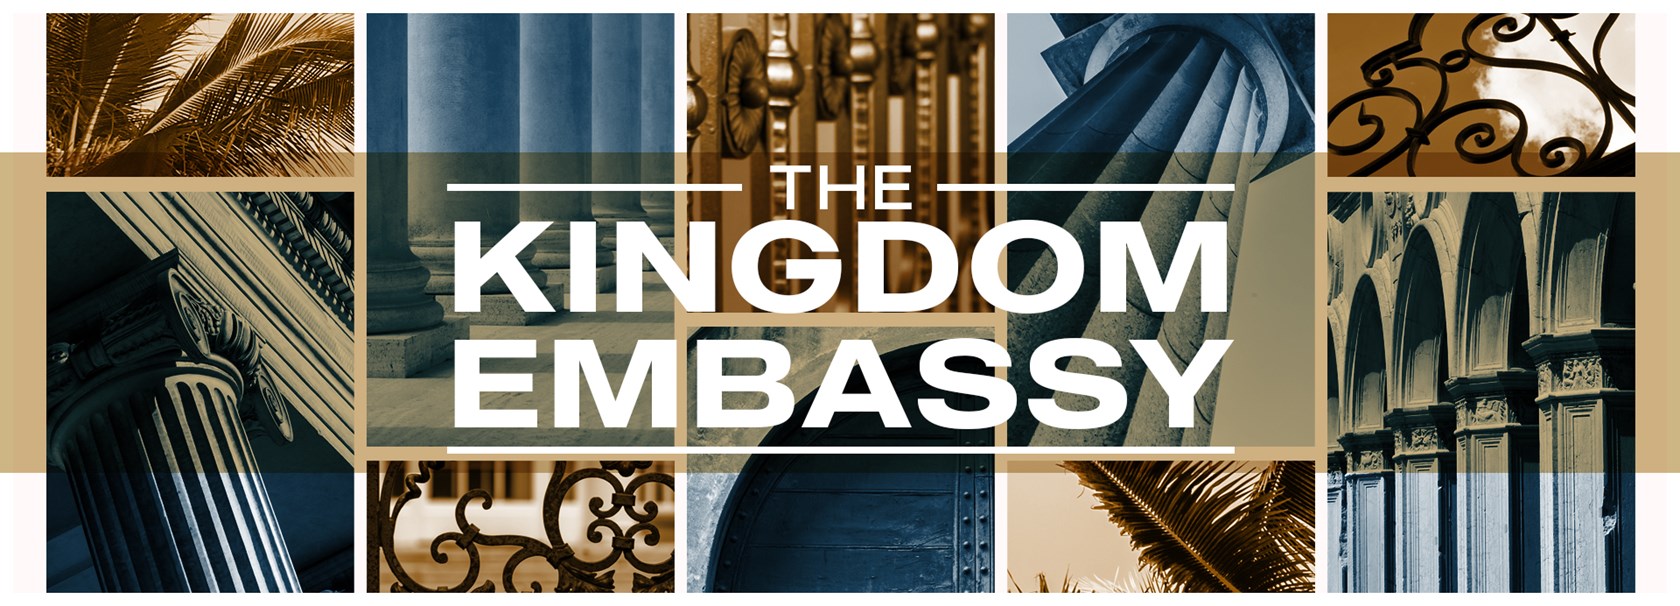 Series graphic for The Kingdom Embassy